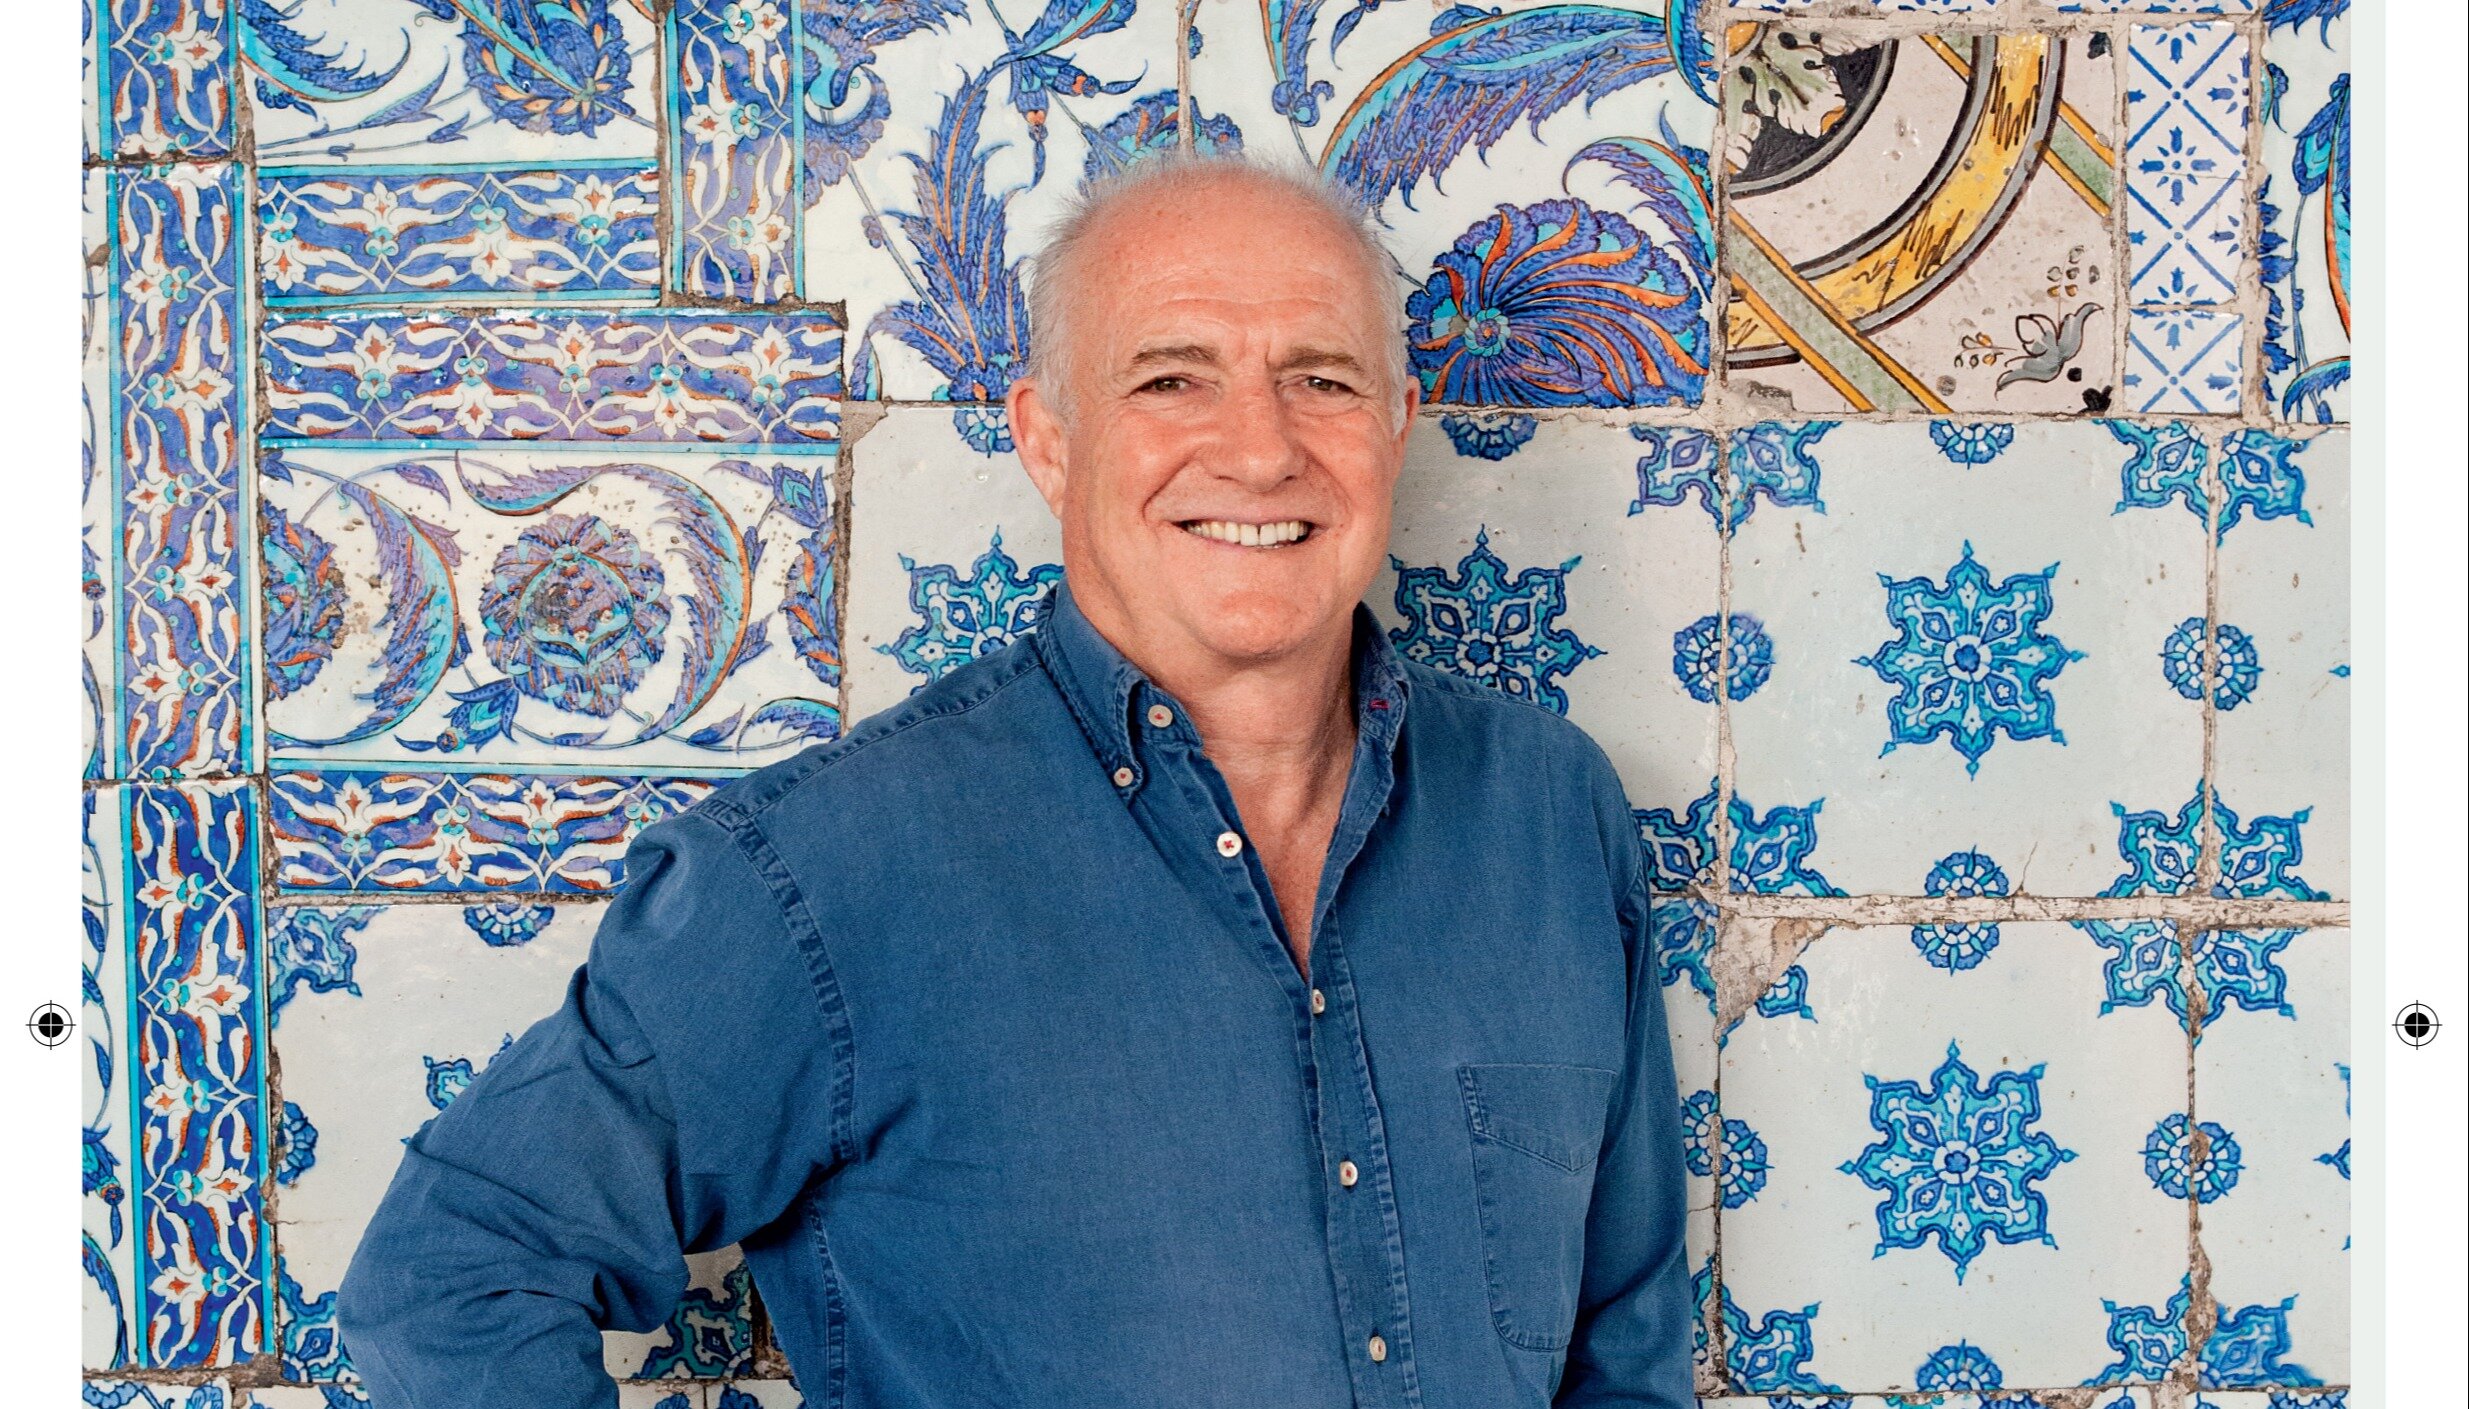 Staycation boom sees Rick Stein urge those looking for jobs to head to the coast 